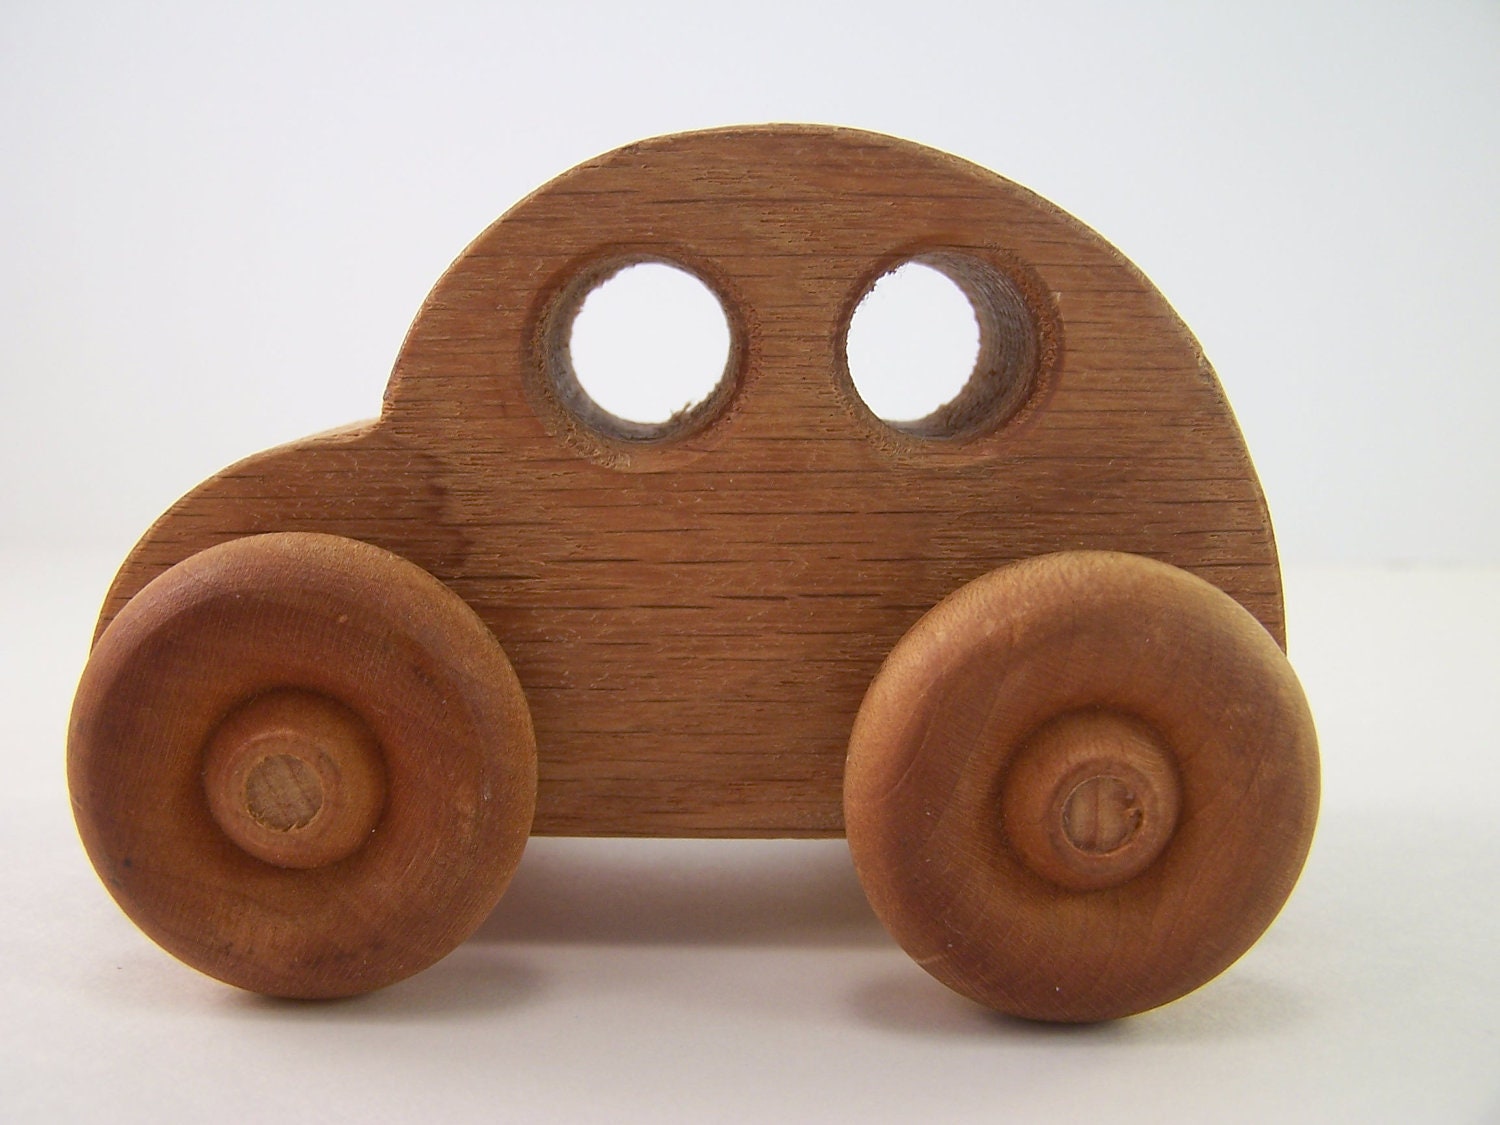 Wooden Car Toy